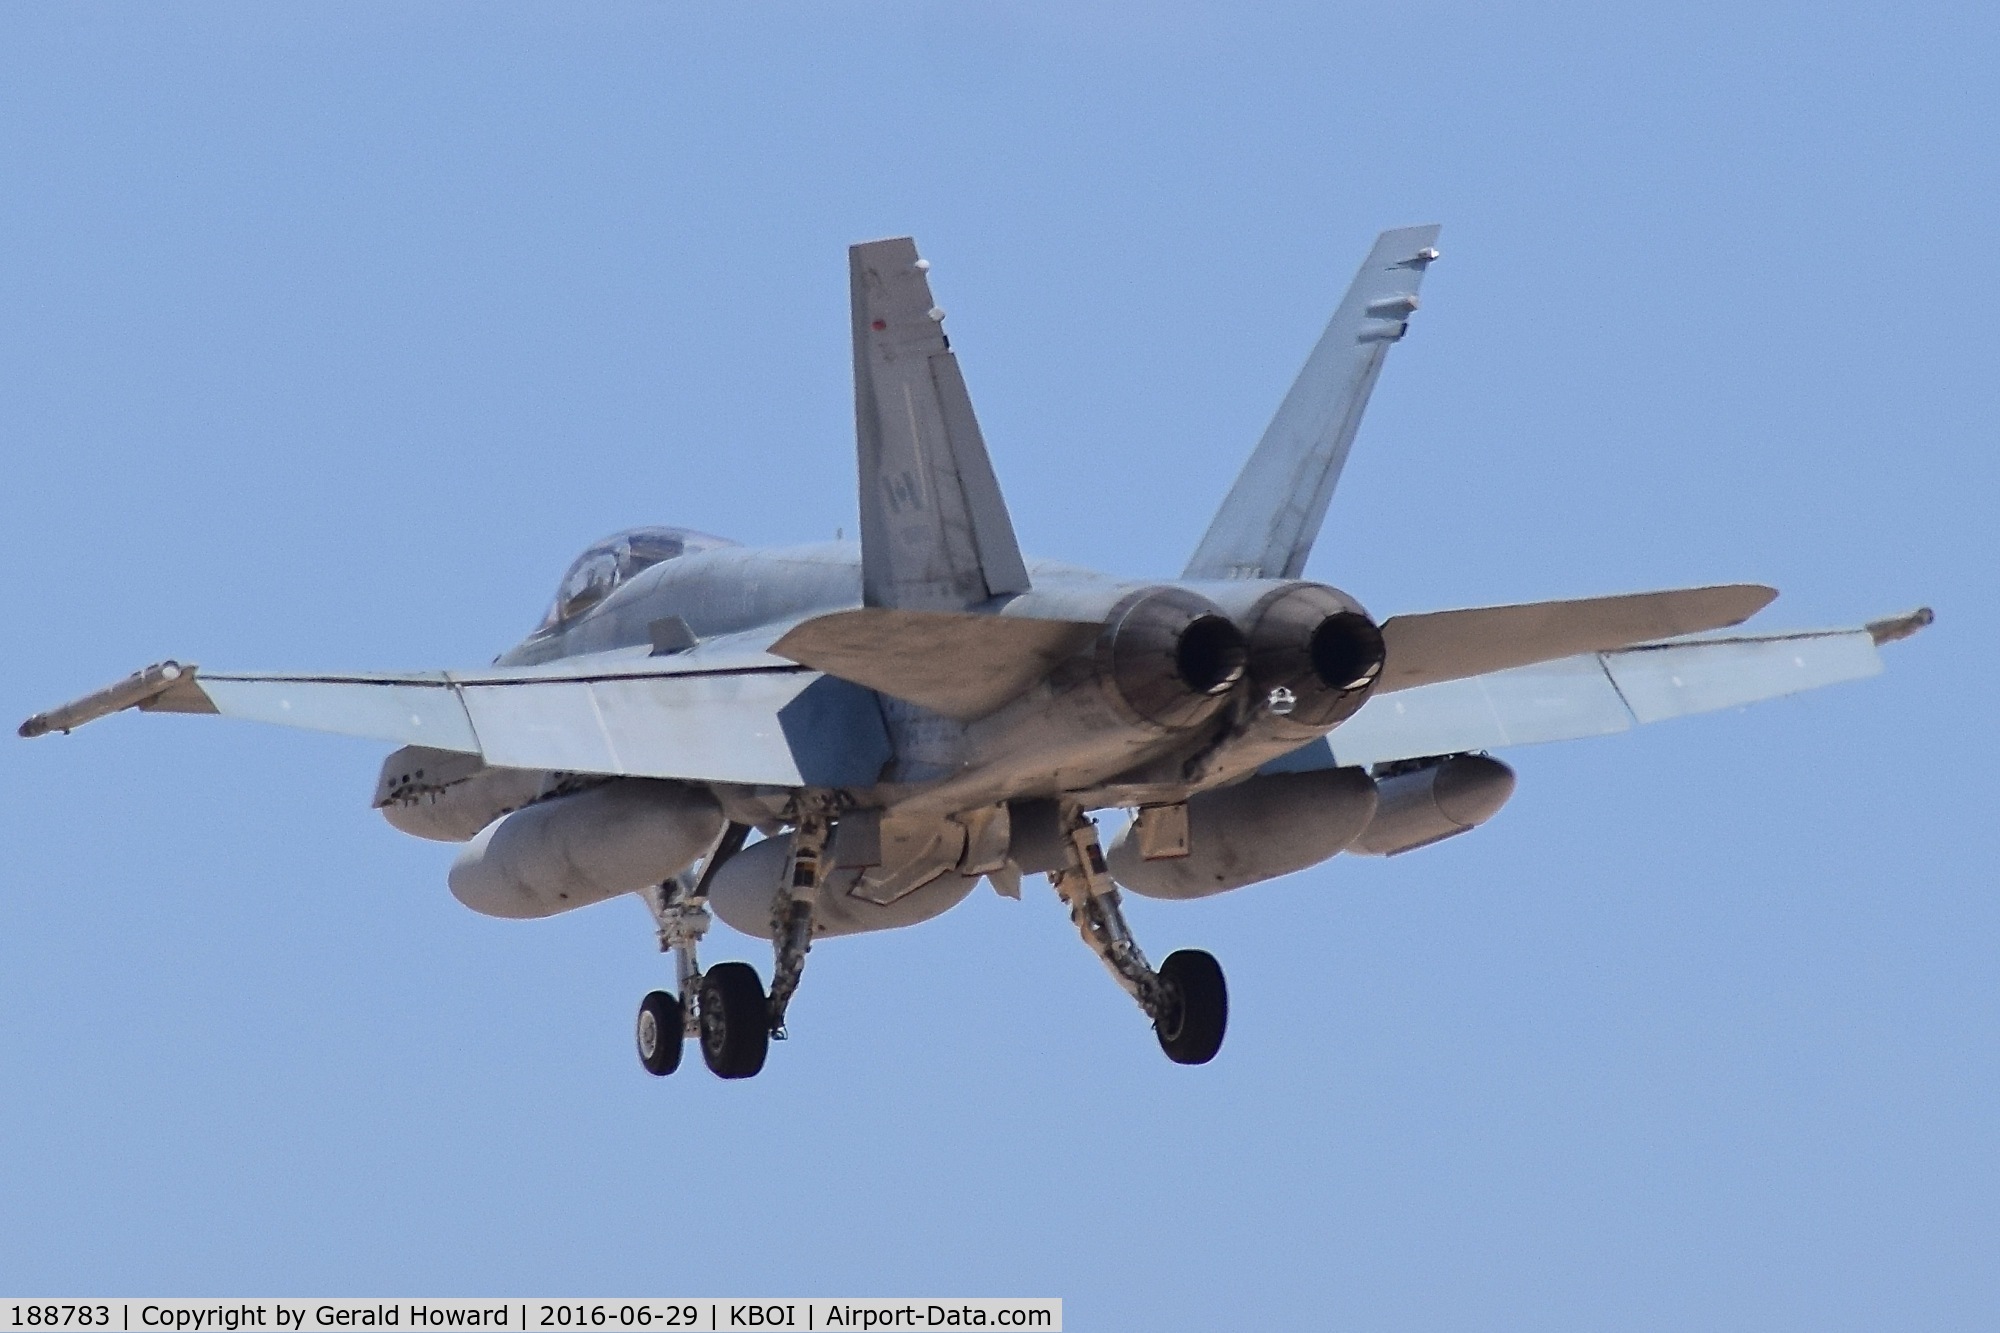 188783, 1987 McDonnell Douglas CF-188A Hornet C/N 0567/A474, On final for RWY 28L.  No. 433 Tactical Fighter Sq., “Porcupine”, 3 Wing, CFB Bagotville, Quebec, Canada.